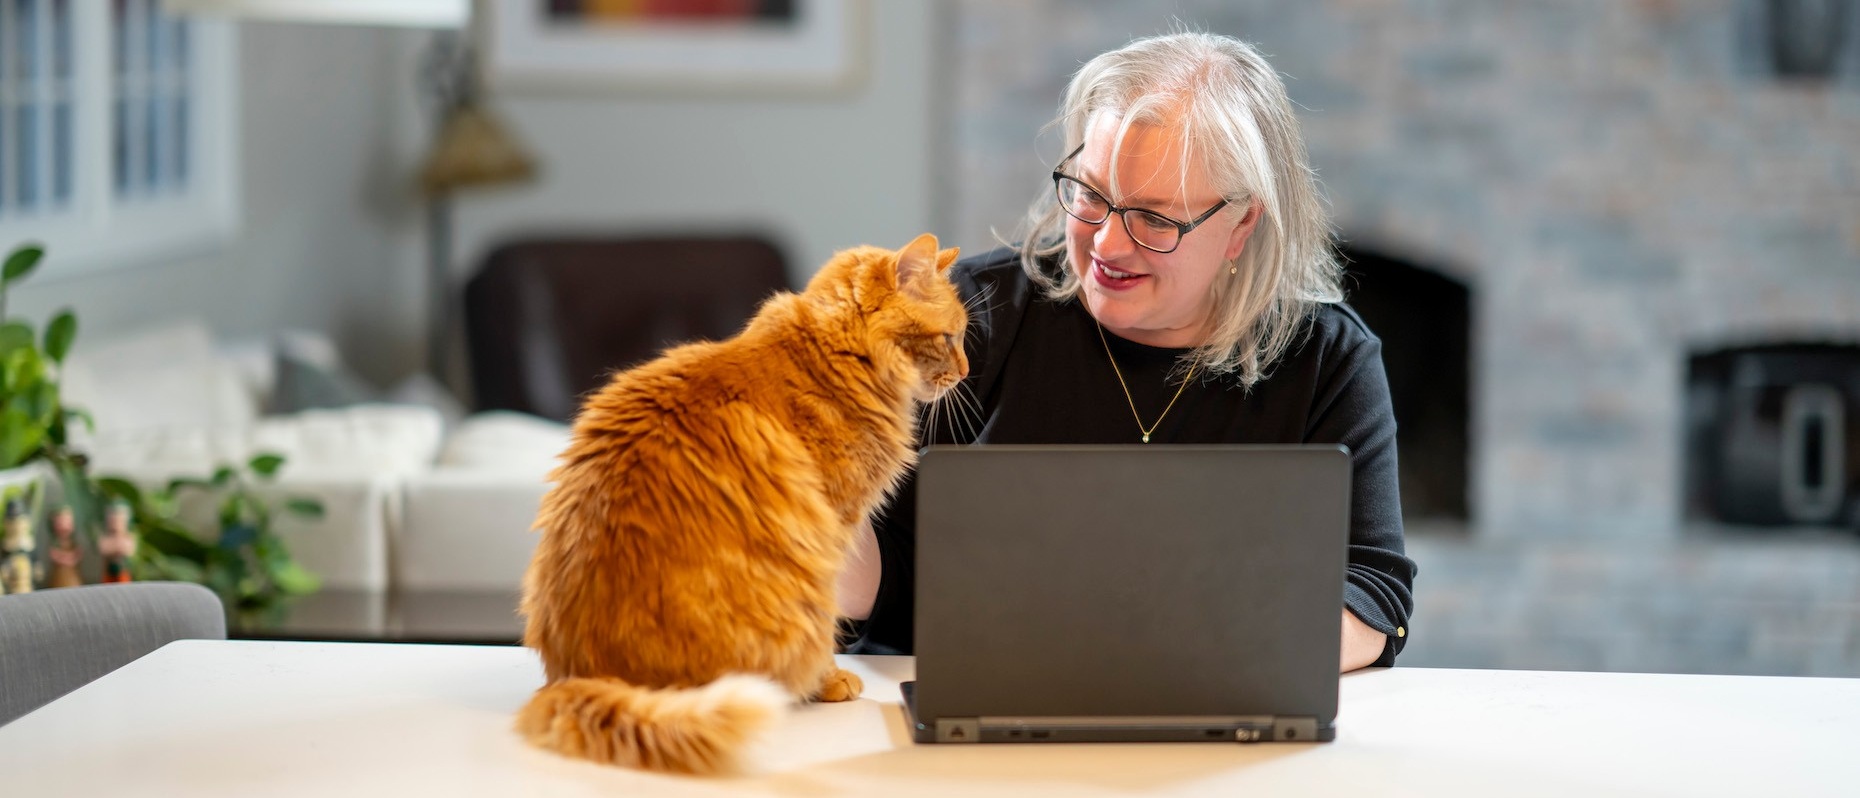 School of Management student working at home on a laptop with help from an orange cat. 